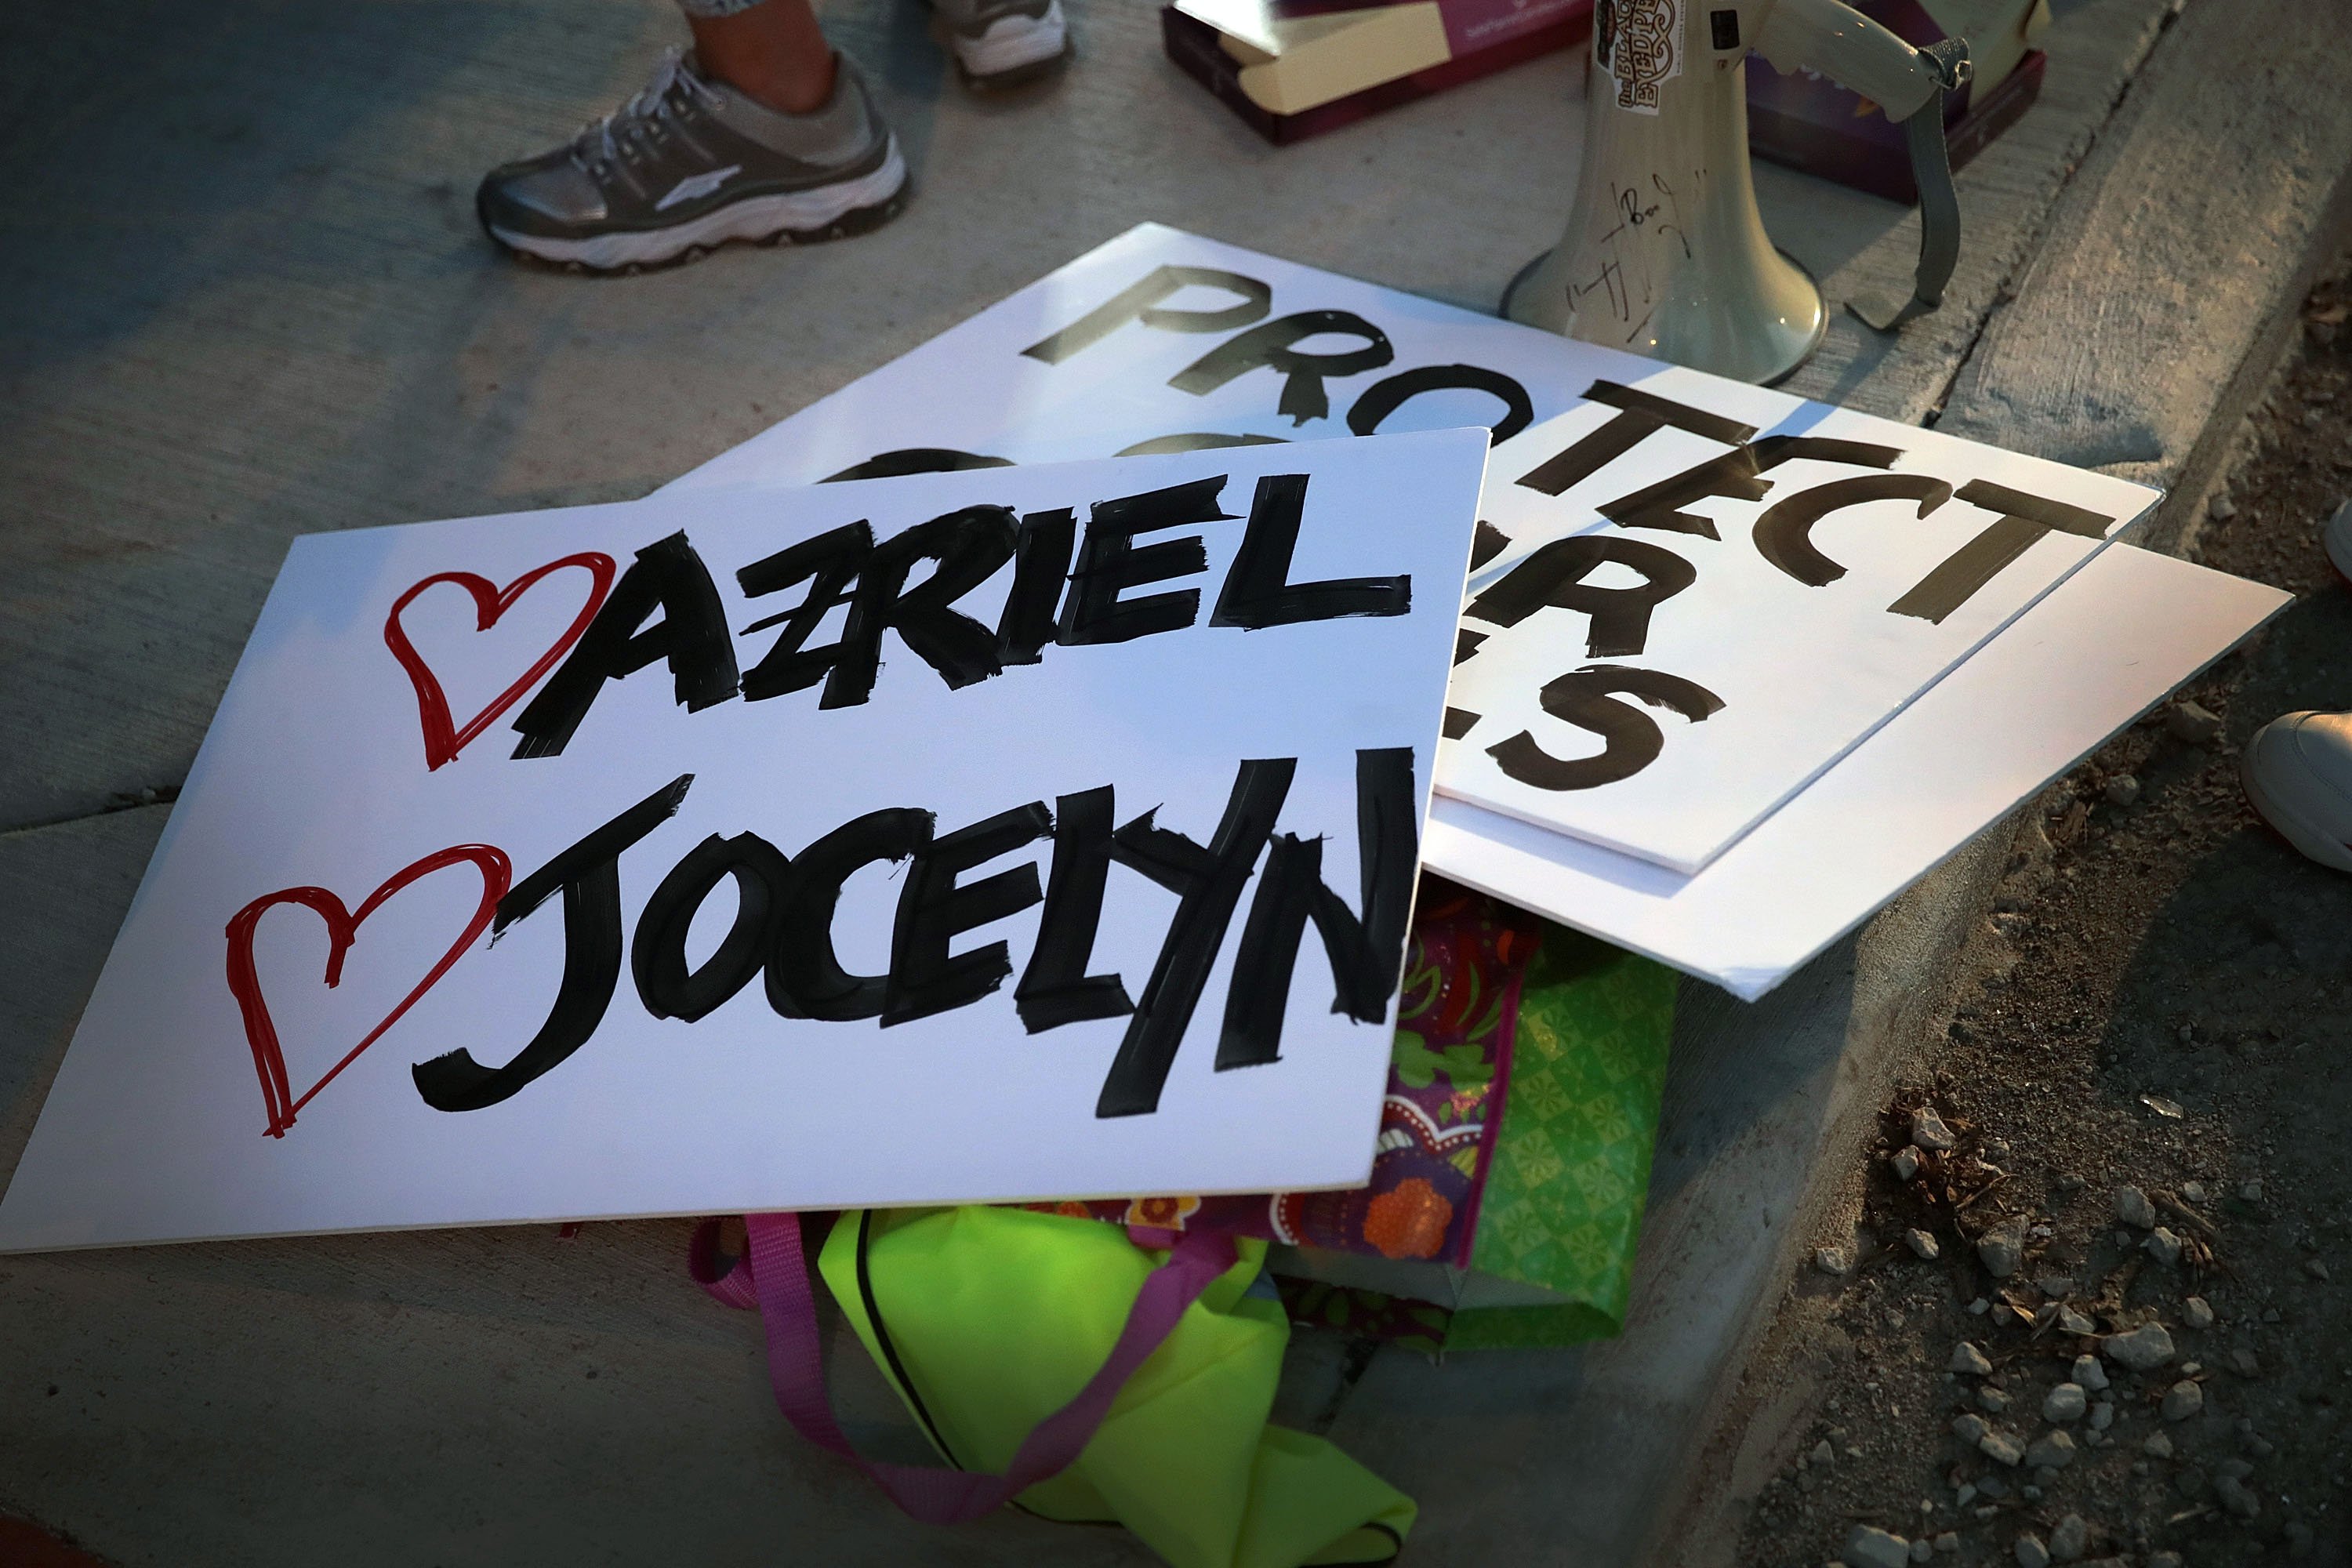 Signs bearing the names of survivors of singer R. Kelly lay on the ground before the start of a demonstration near his studio in Chicago, Illinois.